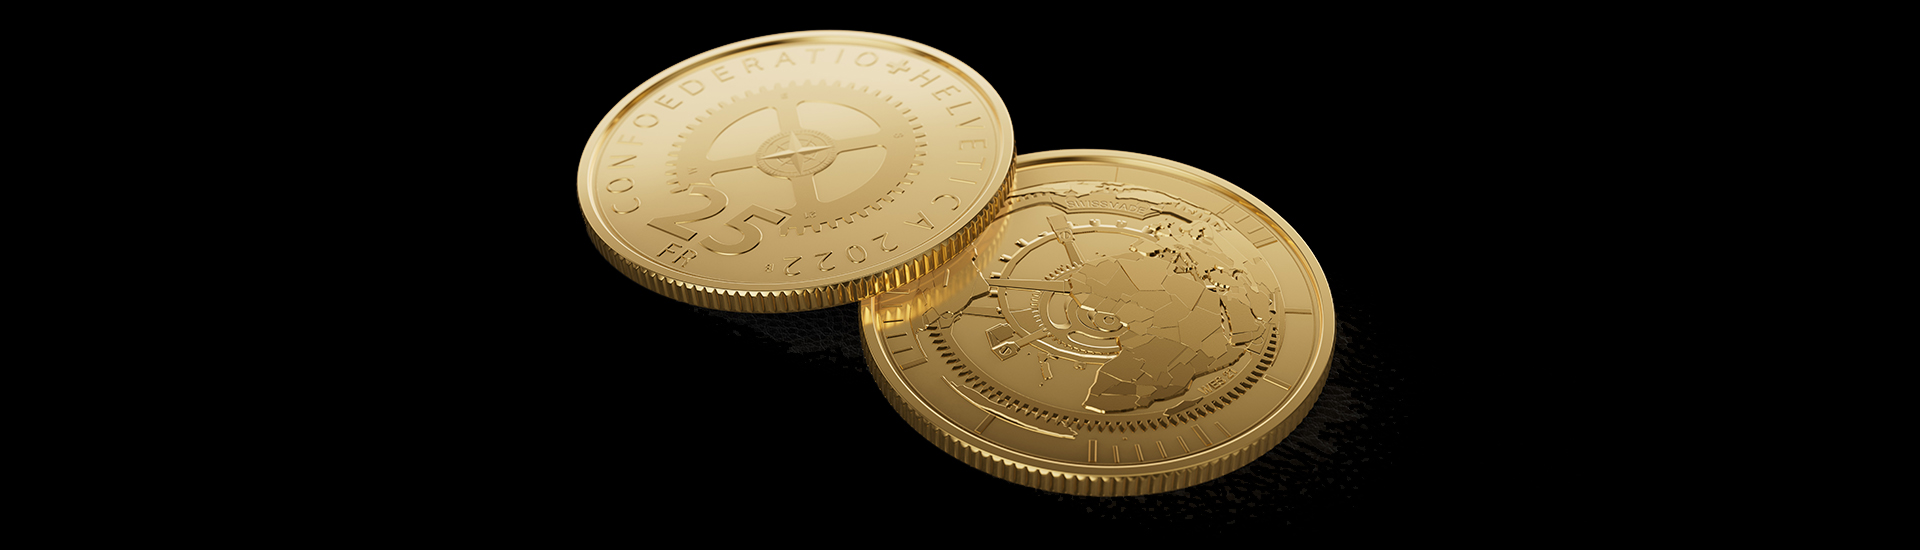 Timemachine gold coin